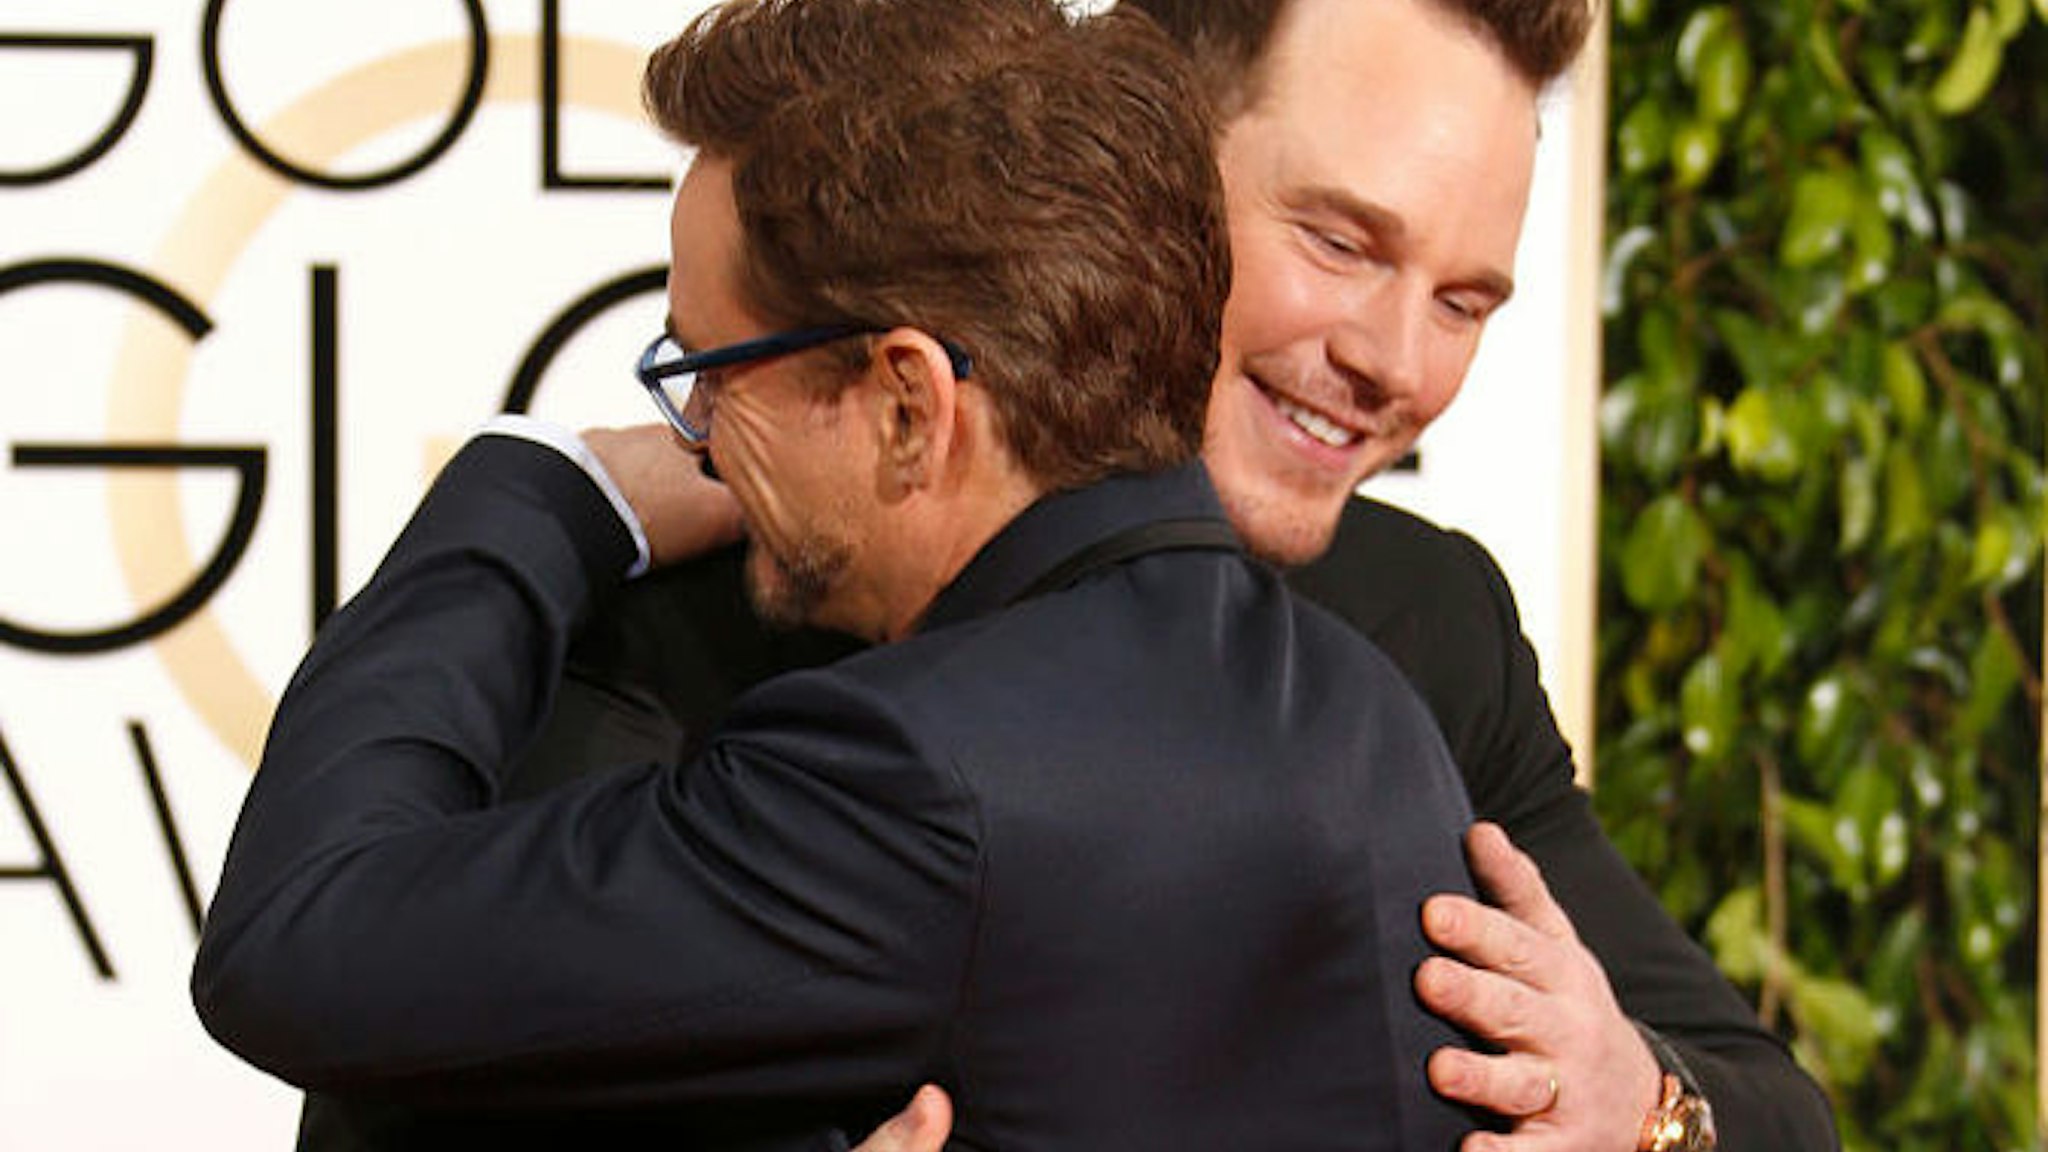 Actors Robert Downey Jr. and Chris Pratt (R) attend the 72nd Annual Golden Globe Awards at The Beverly Hilton Hotel on January 11, 2015 in Beverly Hills, California.